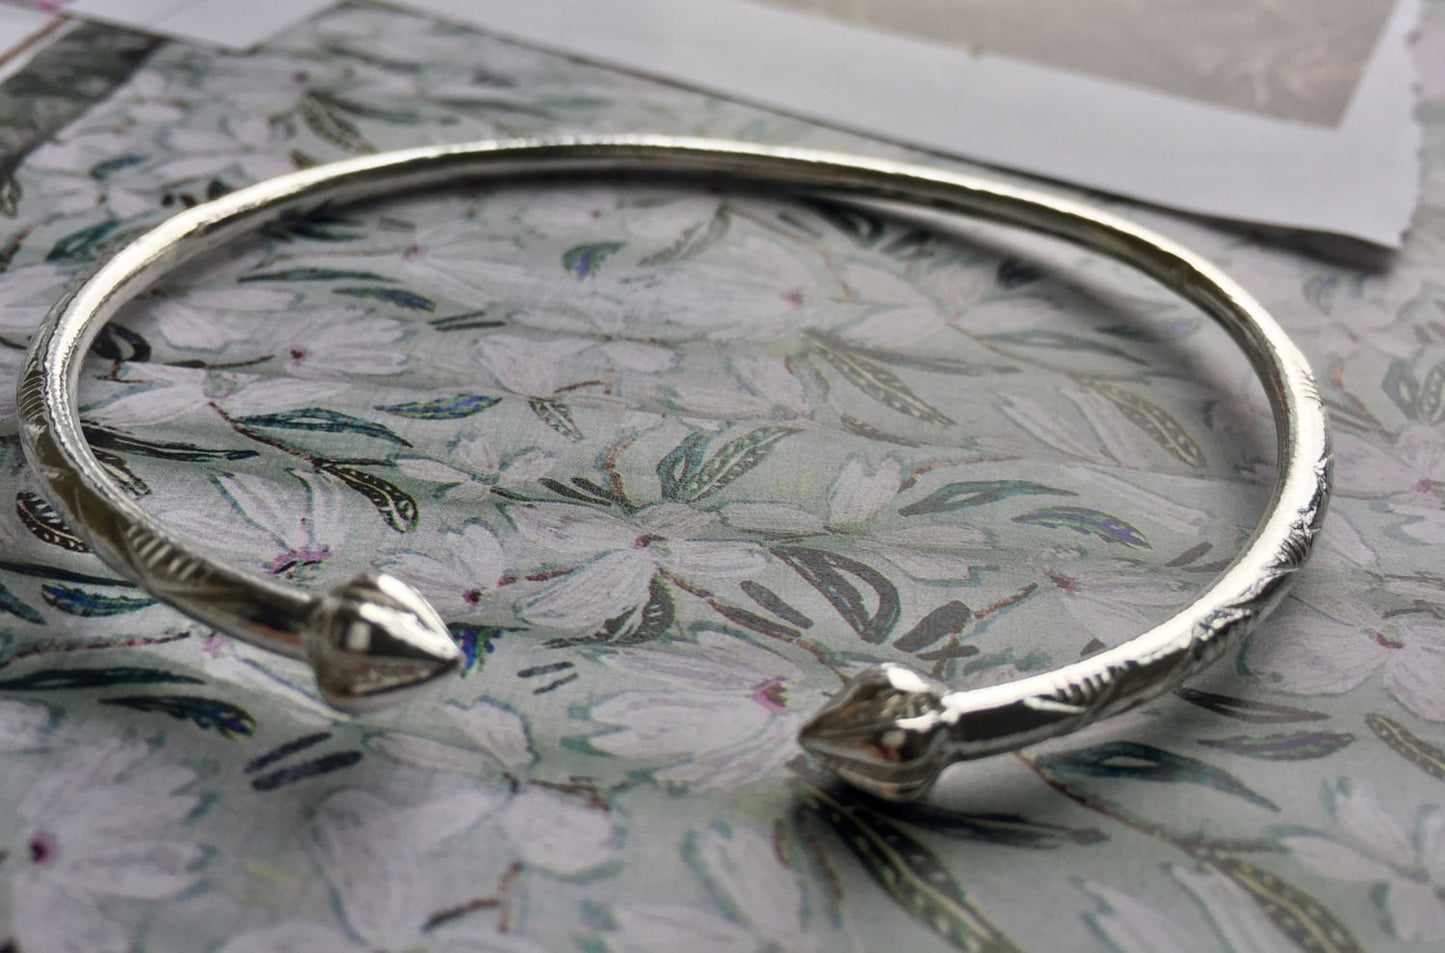 Better Jewelry Cocoa Pods .925 Sterling Silver West Indian Bangle, 1 Piece Sterling Silver / 8 / 3.5mm